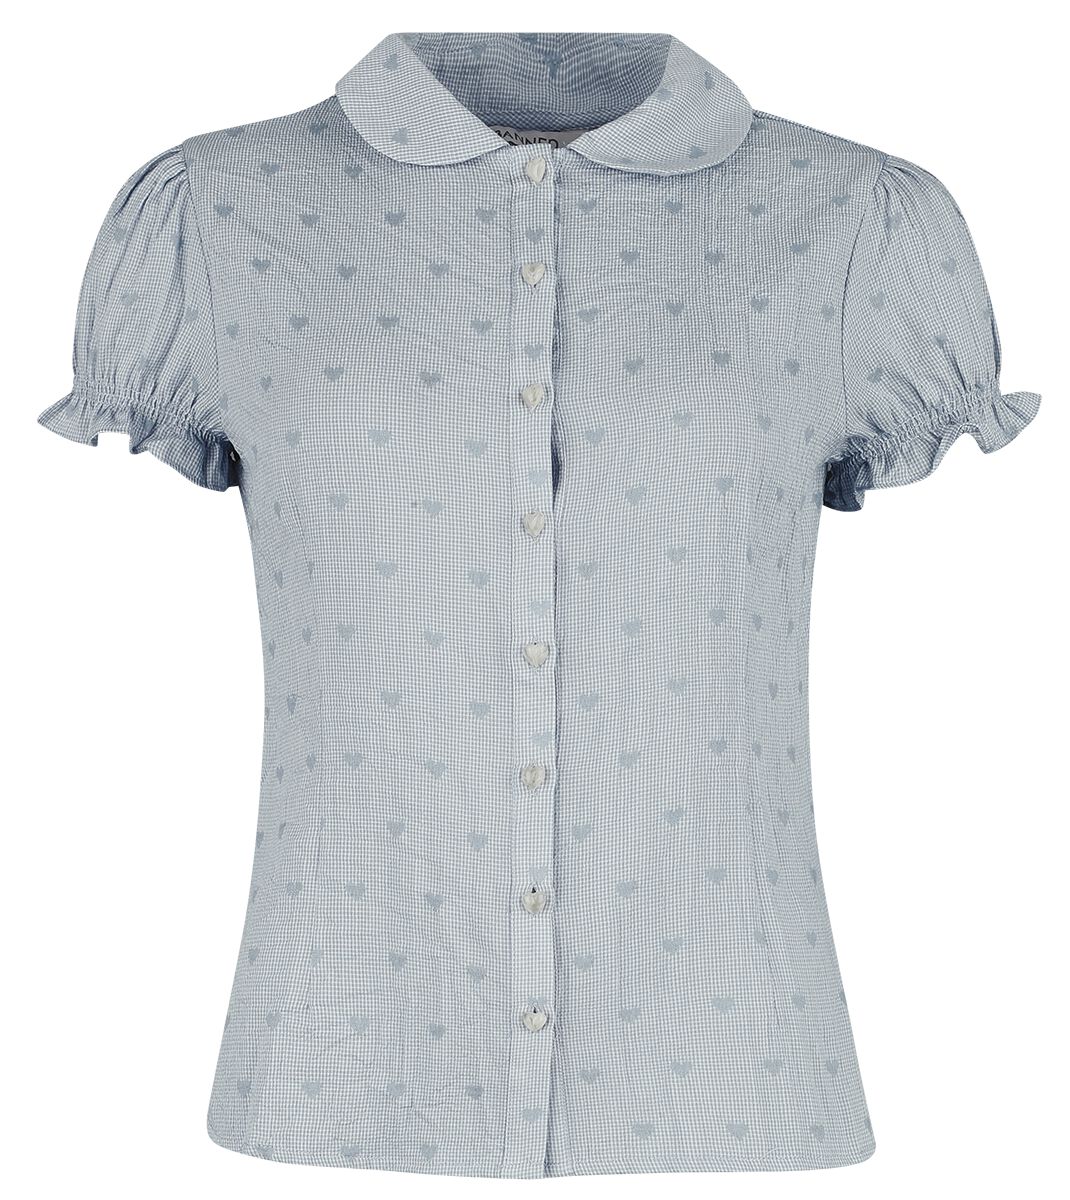 Image of Blusa Rockabilly di Banned Retro - Heart On Her Sleeve Blouse - XS a 4XL - Donna - blu